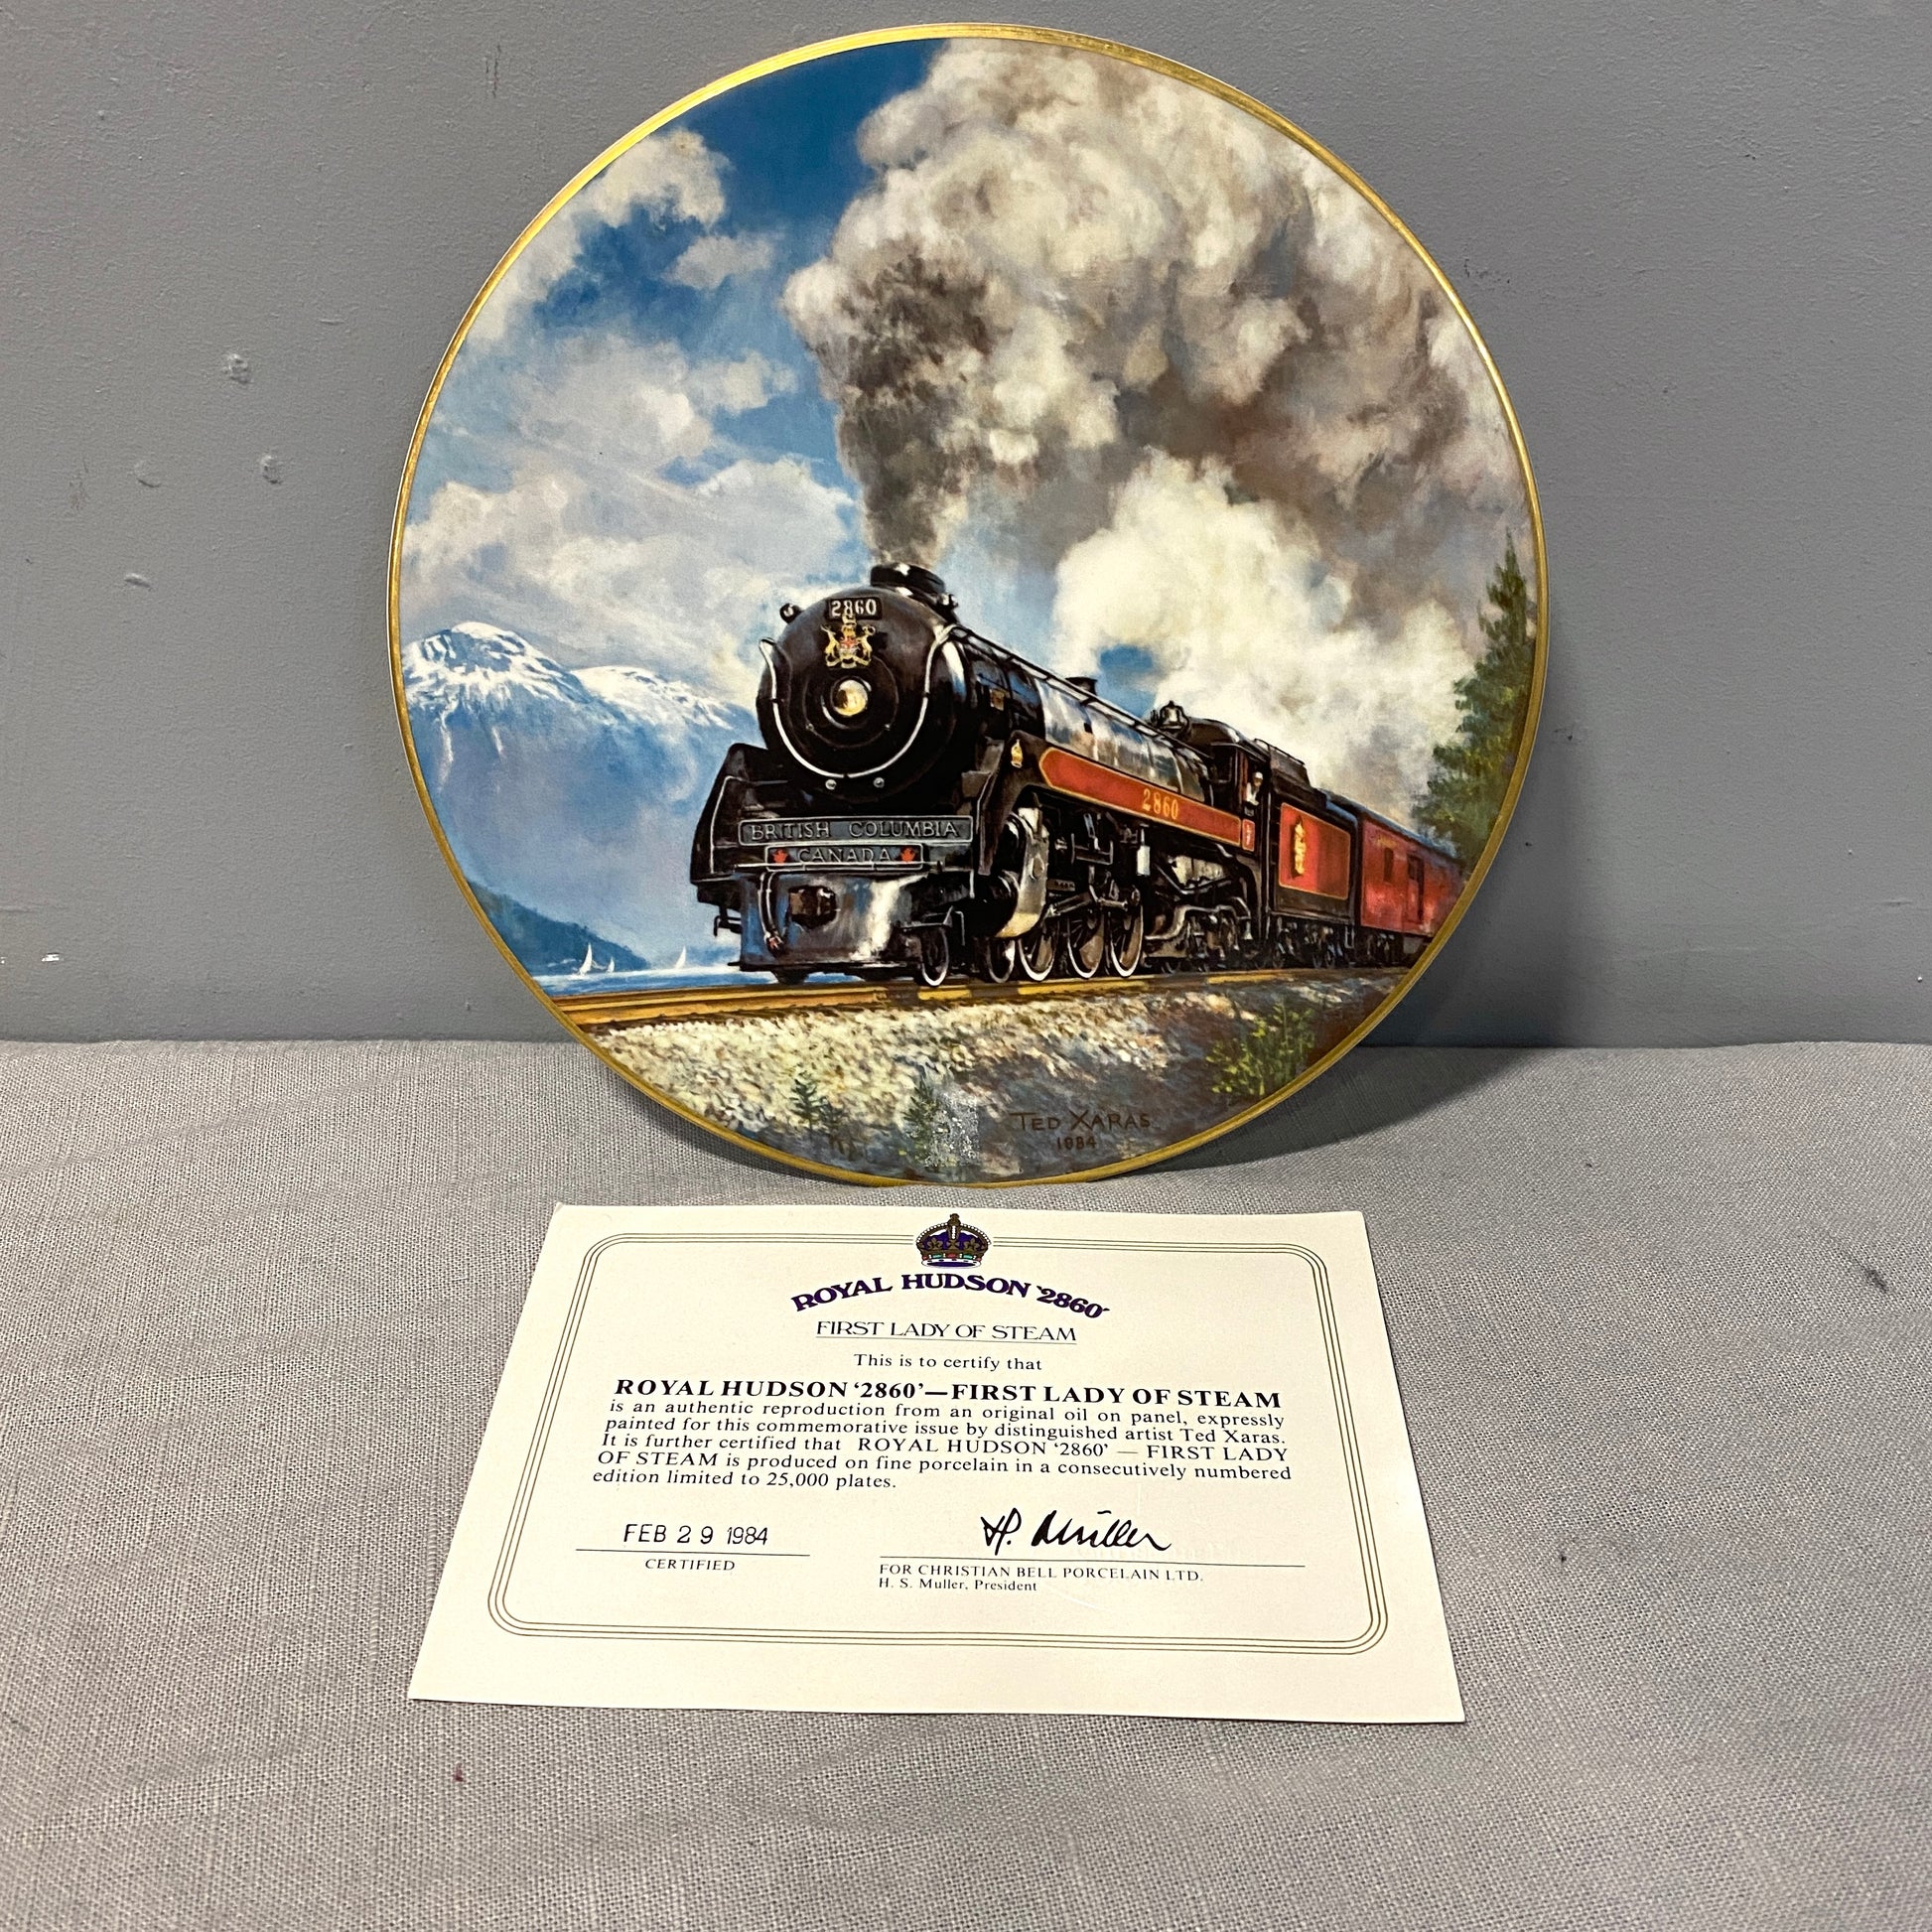 'First Lady of Steam' collector plate for sale in Calgary, Alberta.